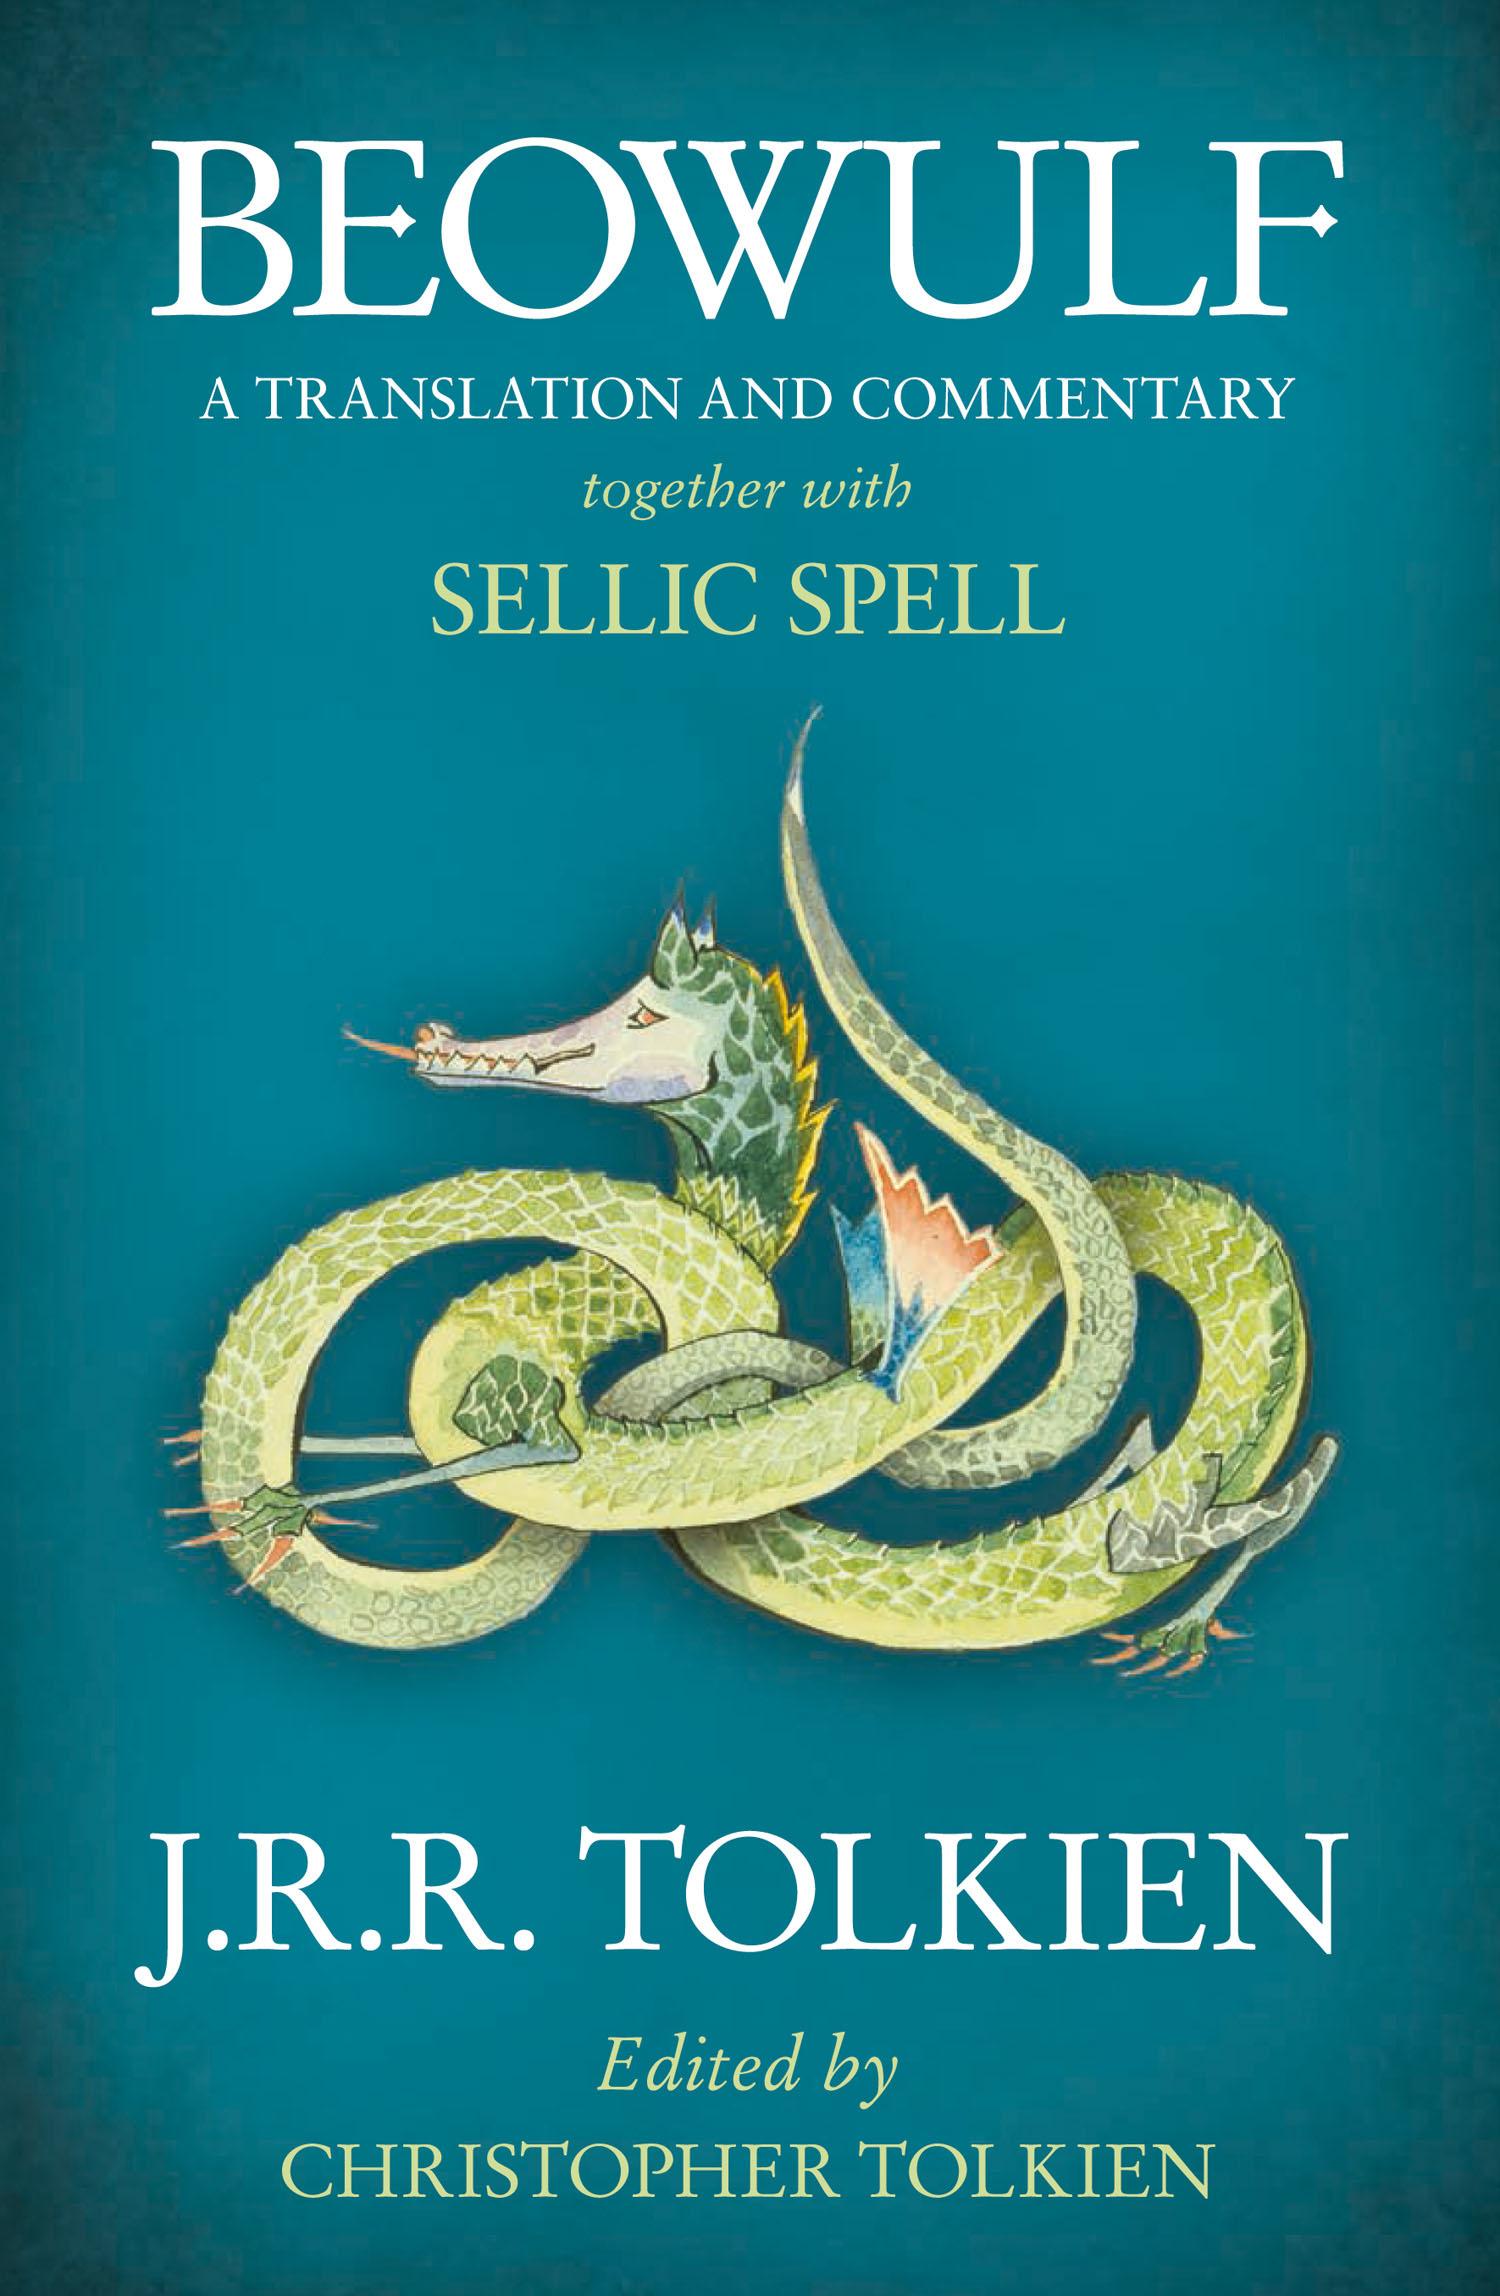 Beowulf | A Translation and Commentary, together with Sellic Spell | J. R. R. Tolkien | Taschenbuch | XIV | Englisch | 2016 | Harper Collins Publ. UK | EAN 9780007590094 - Tolkien, J. R. R.